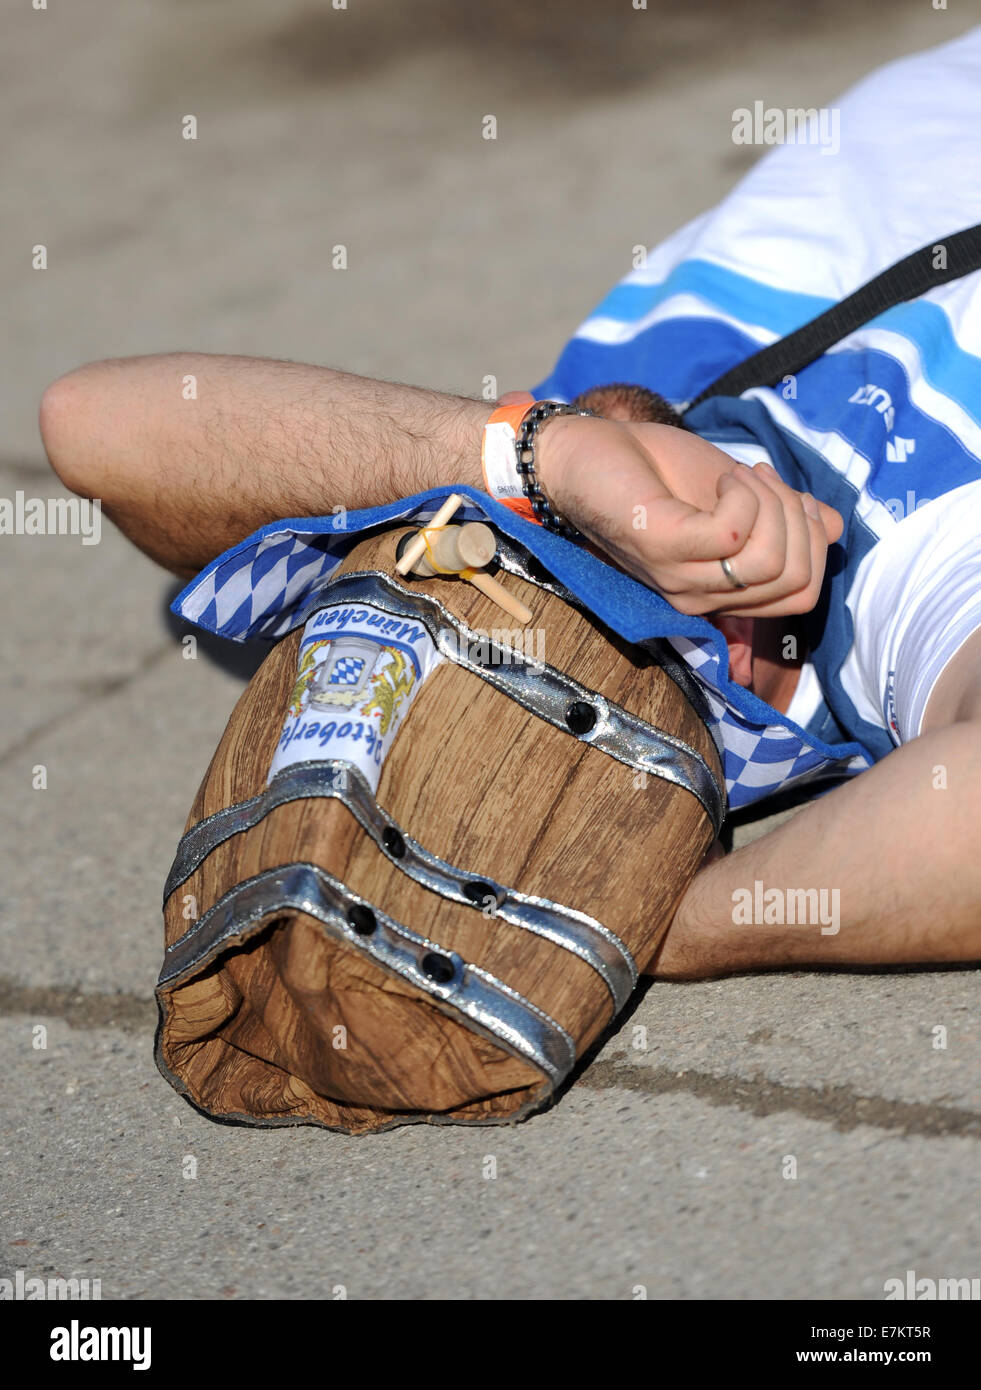 Munich, Germany. 20th Sep, 2014. A drunken man sleeps outside of a festival tent during the opening day of Oktoberfest in Munich, Germany, 20 September 2014. The Munich beer festival continues until 05 October 2014. Photo: ANDREAS GEBERT/dpa/Alamy Live News Stock Photo